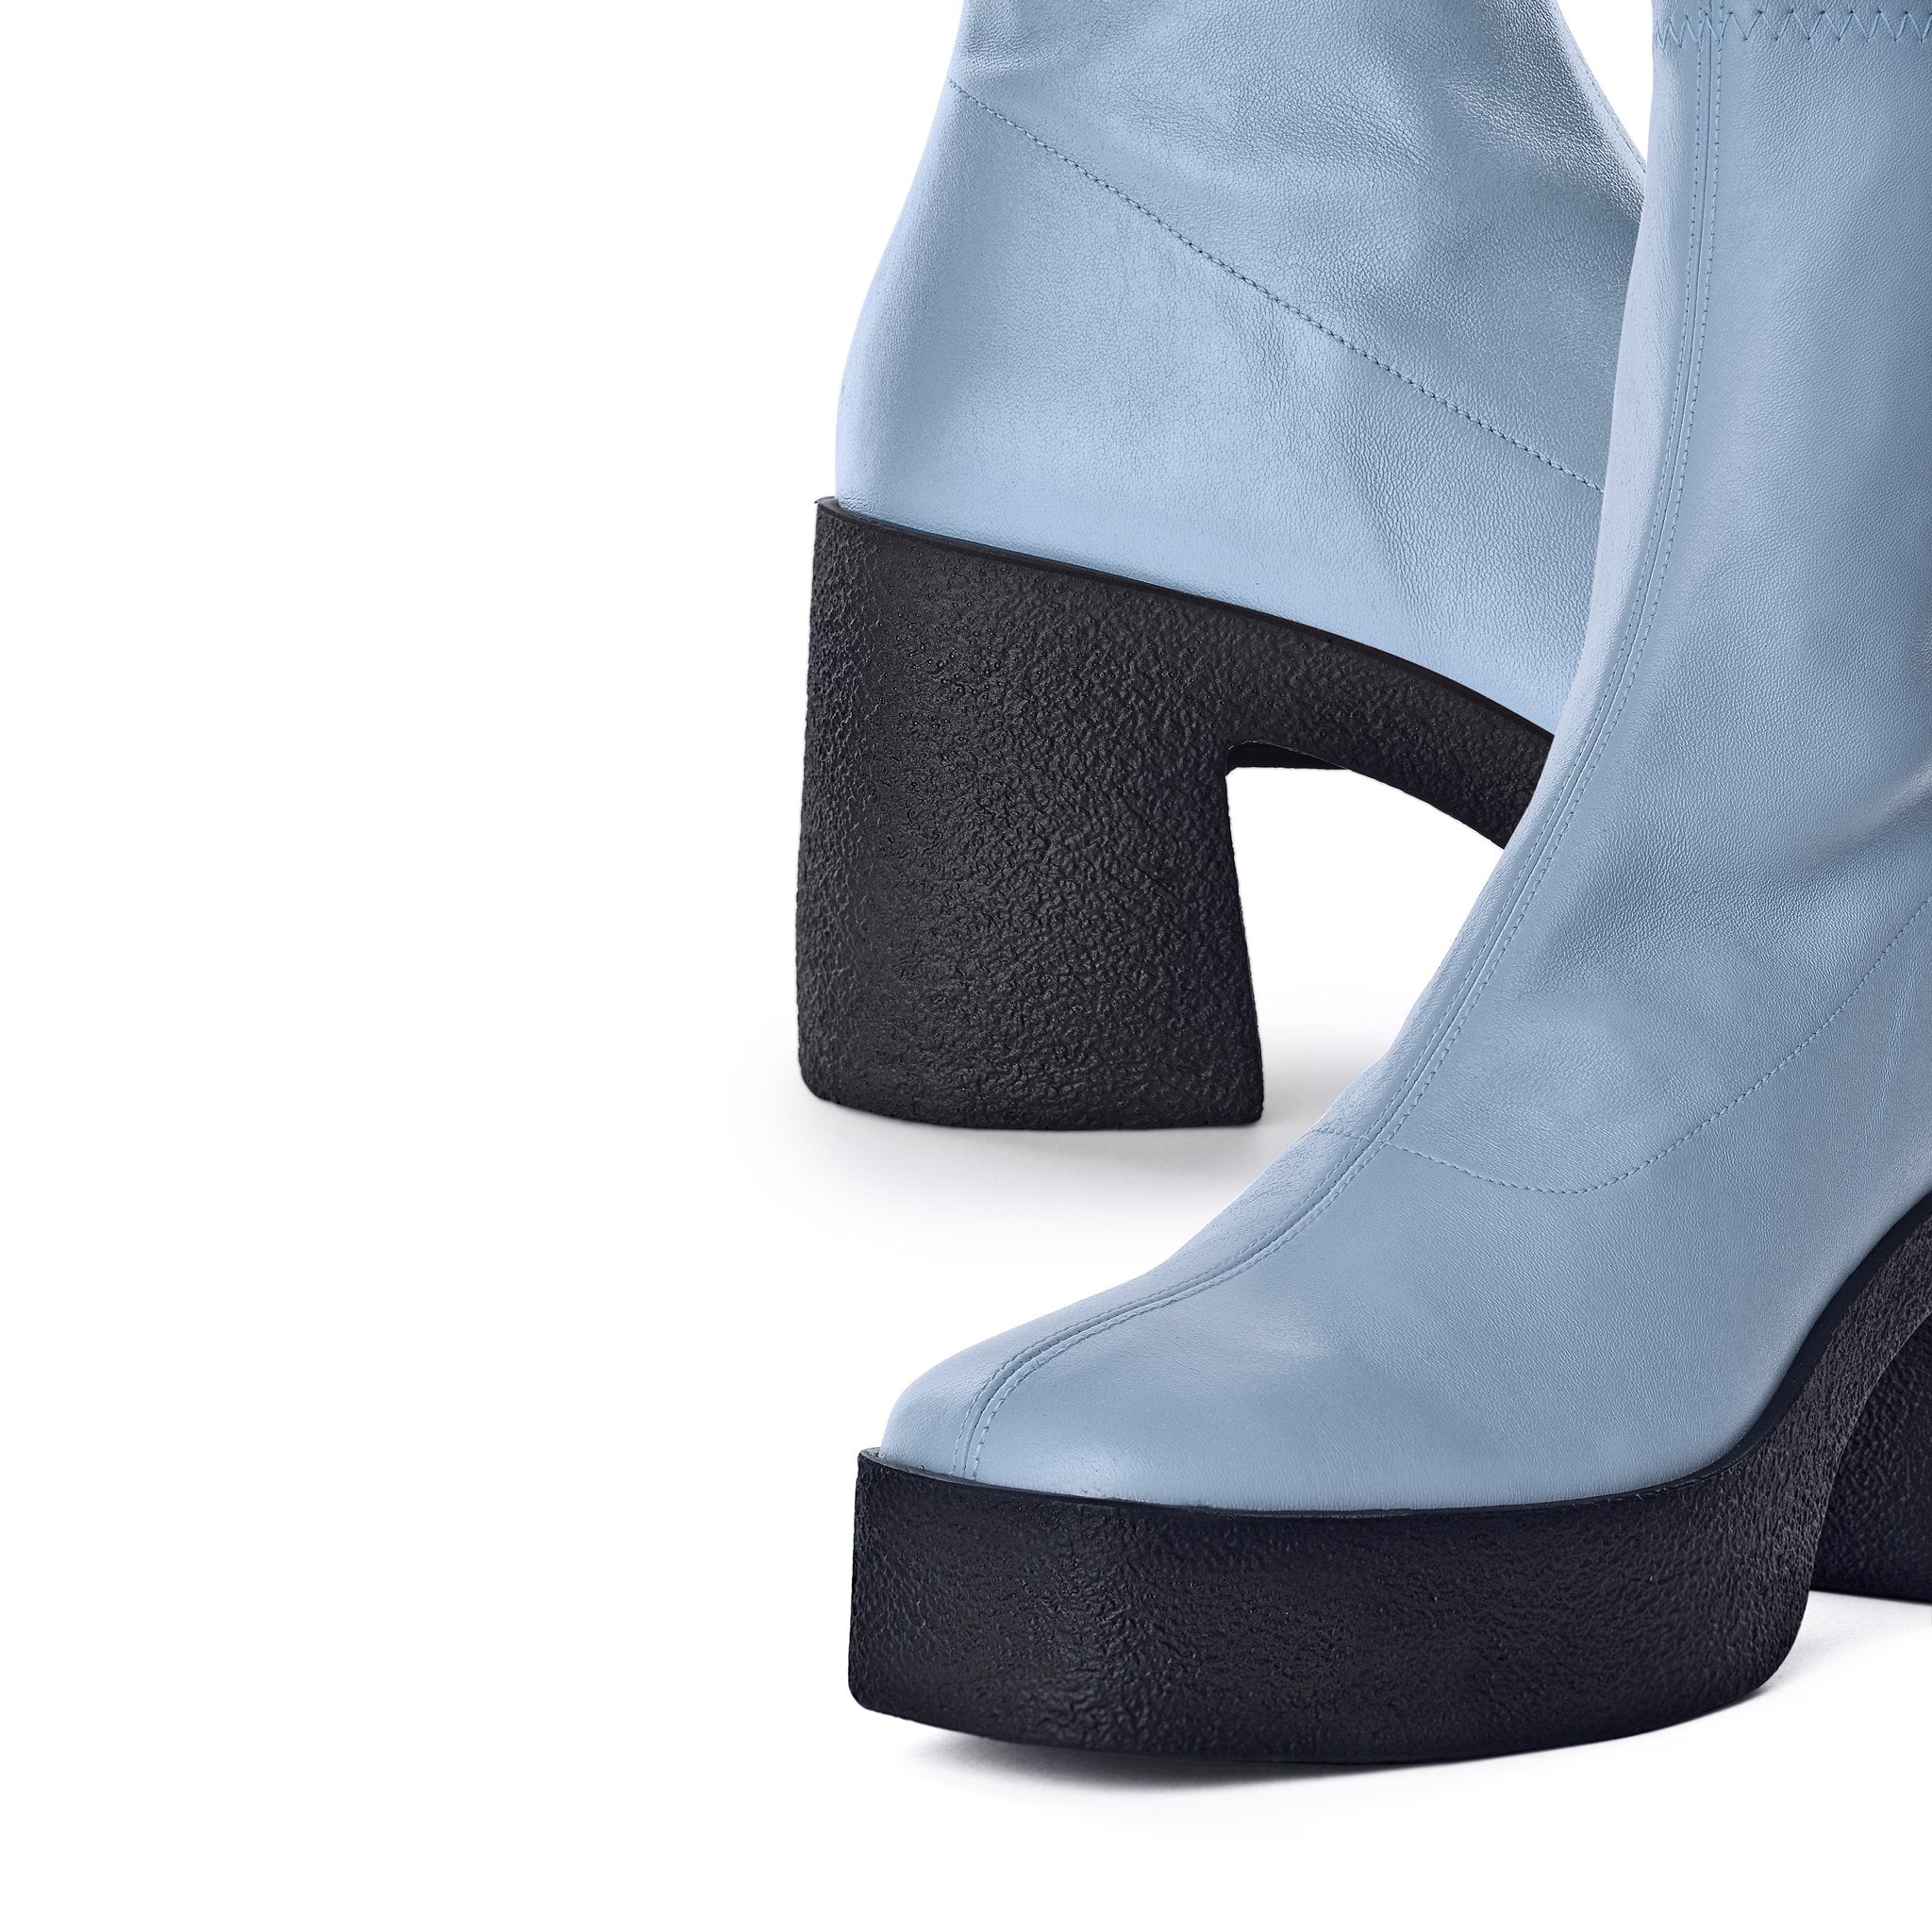 Umi Pastel Blue Stretch Leather Chunky Ankle Boots 20077-02-07 - 7